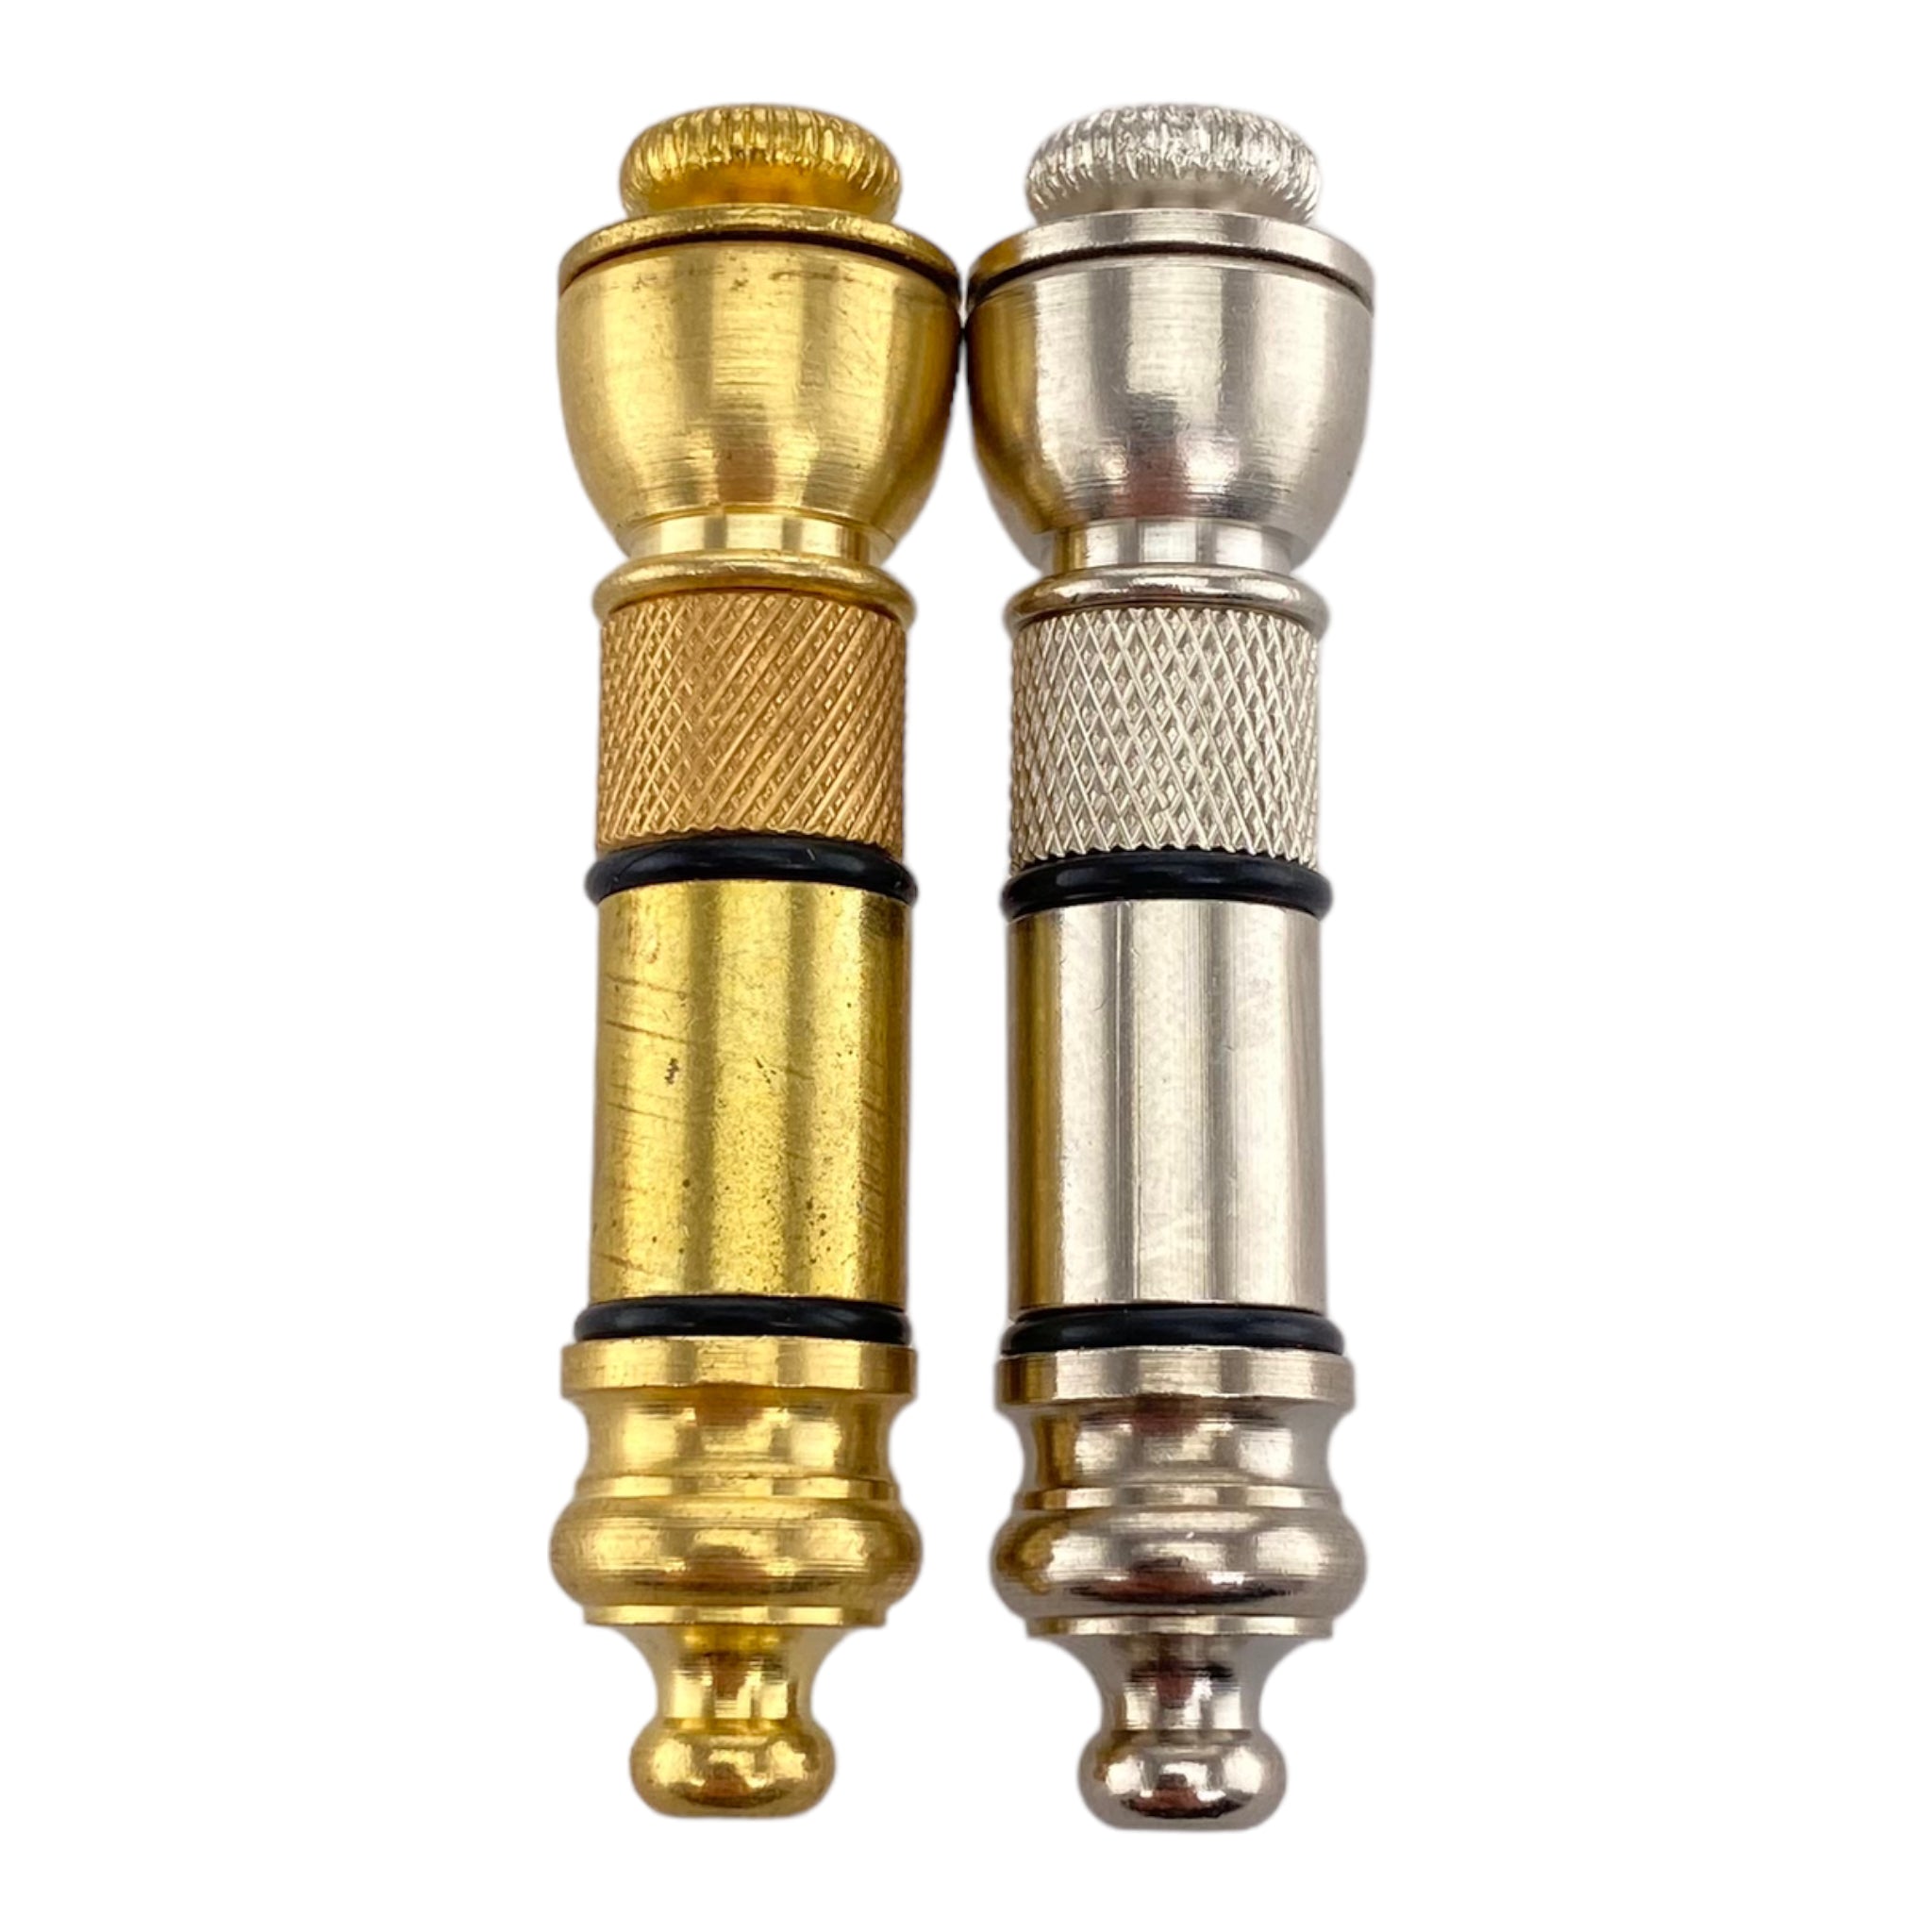 Metal smoking Hand Pipes Anodized Aluminum Mini Chillum One Hitter Hand Pipe With Cap 2 Pack Assorted Colors